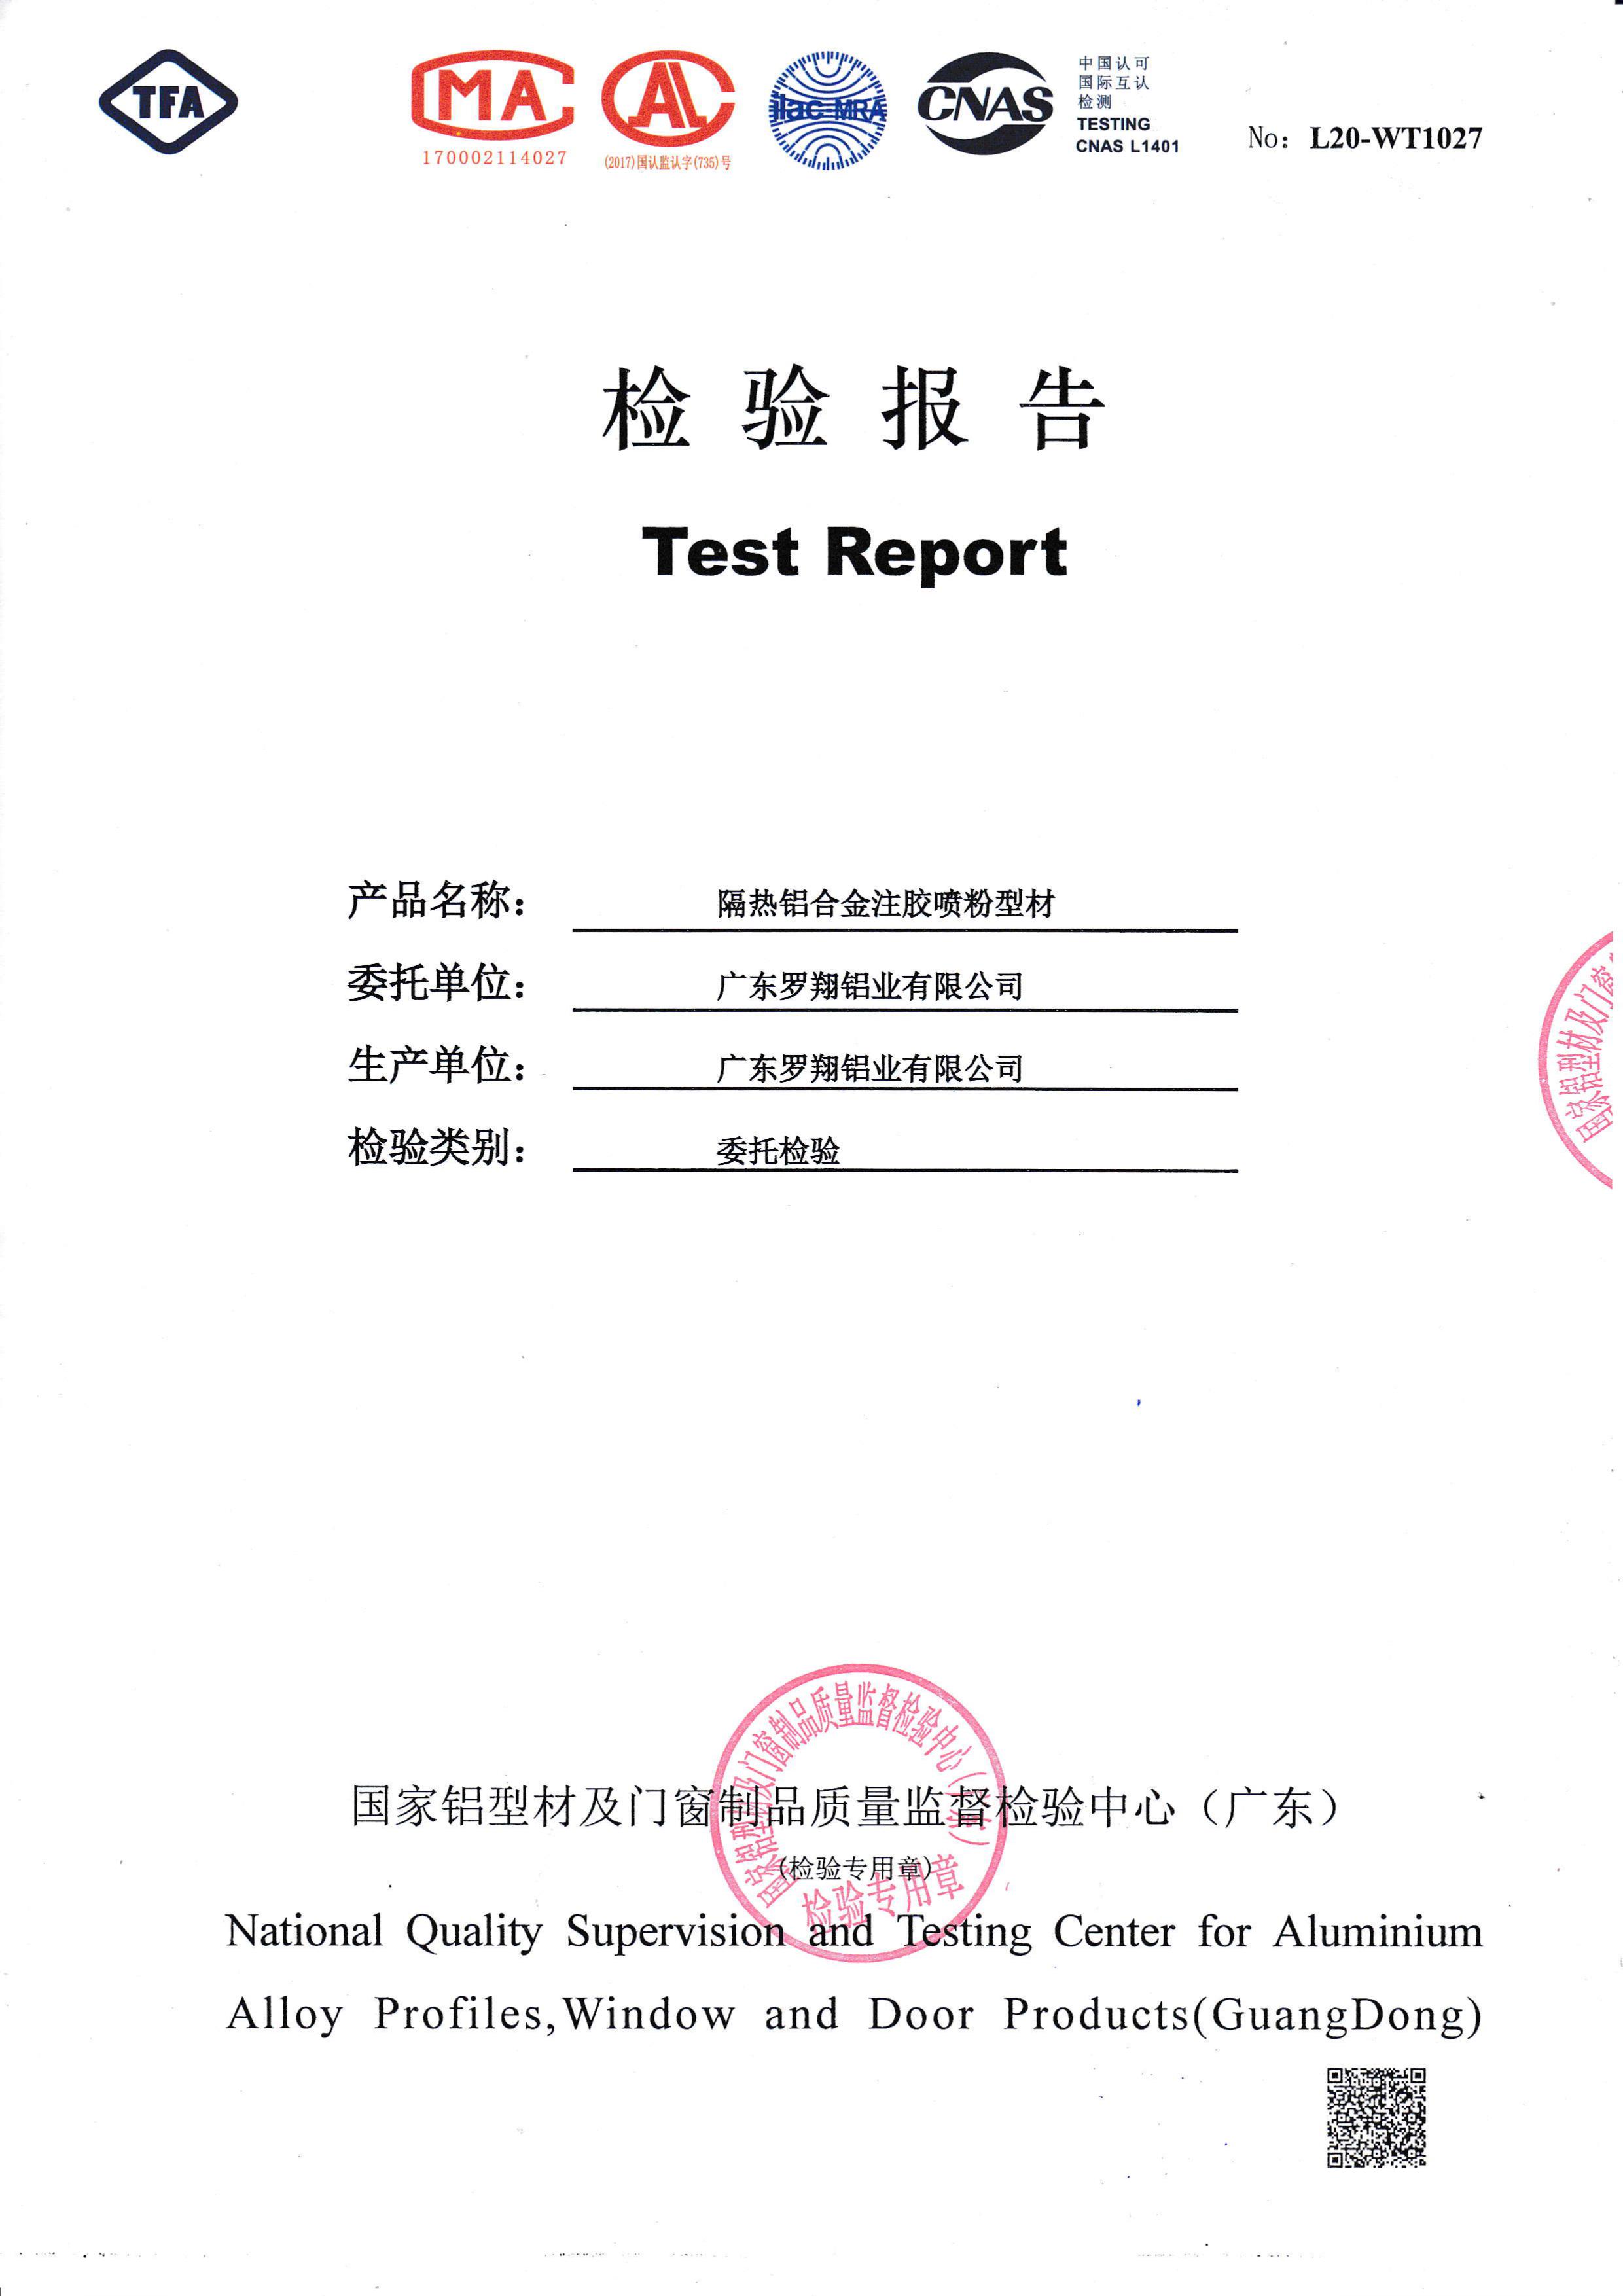 Thermal insulation test report of powder injection and glue injection (1)